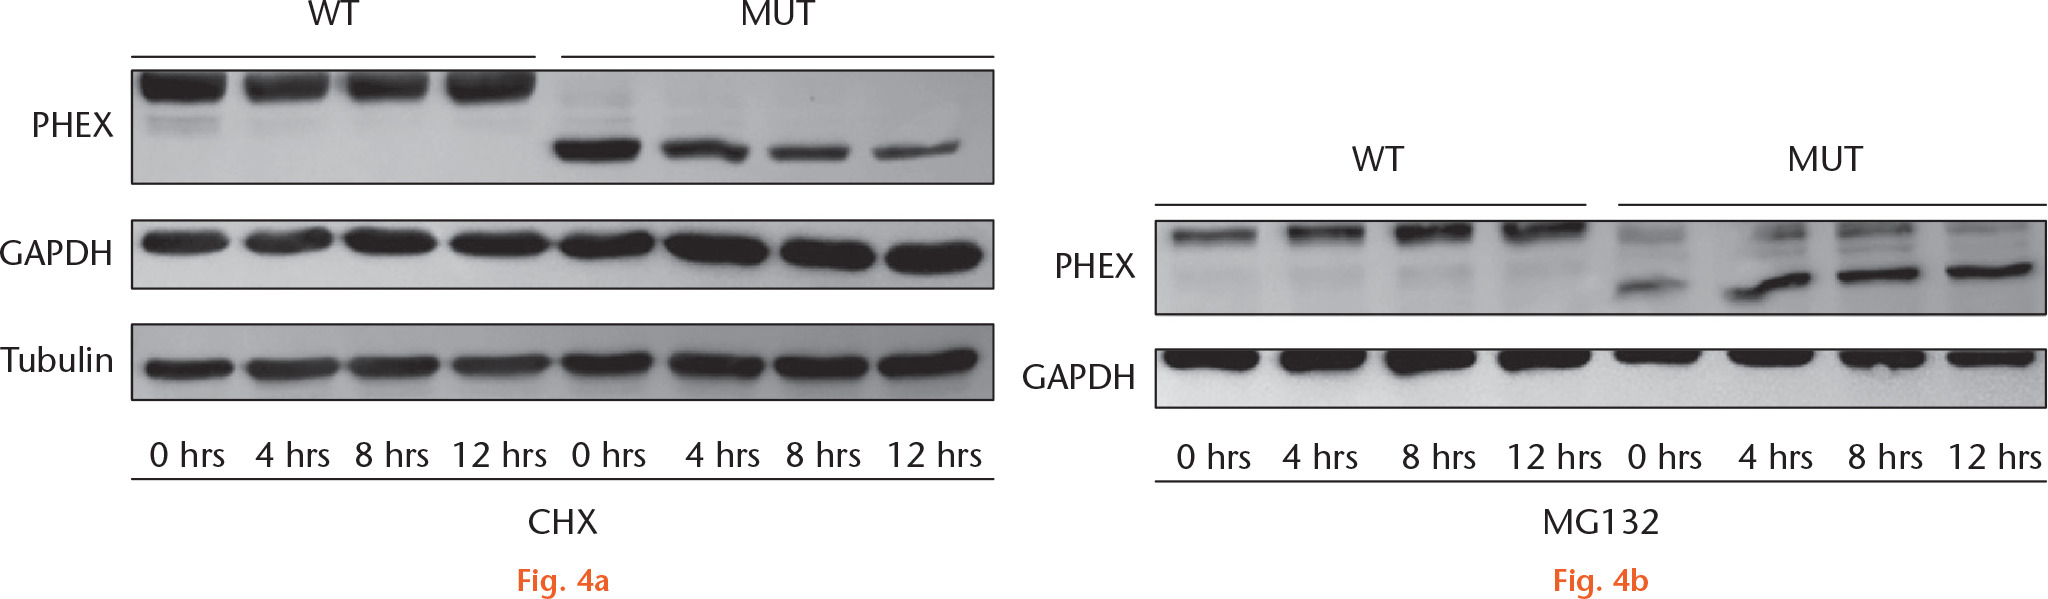 Fig. 4 
            Mutant (MUT) phosphate-regulating neutral endopeptidase, X-linked (PHEX) protein degrades more rapidly than wild-type (WT) protein. a) PHEX bands at baseline, four hours, eight hours, and 12 hours with cycloheximide (CHX) treatment. b) PHEX bands at baseline, four hours, eight hours, and 12 hours with MG132 treatment. GADPH, glyceraldehyde 3-phosphate dehydrogenase.
          